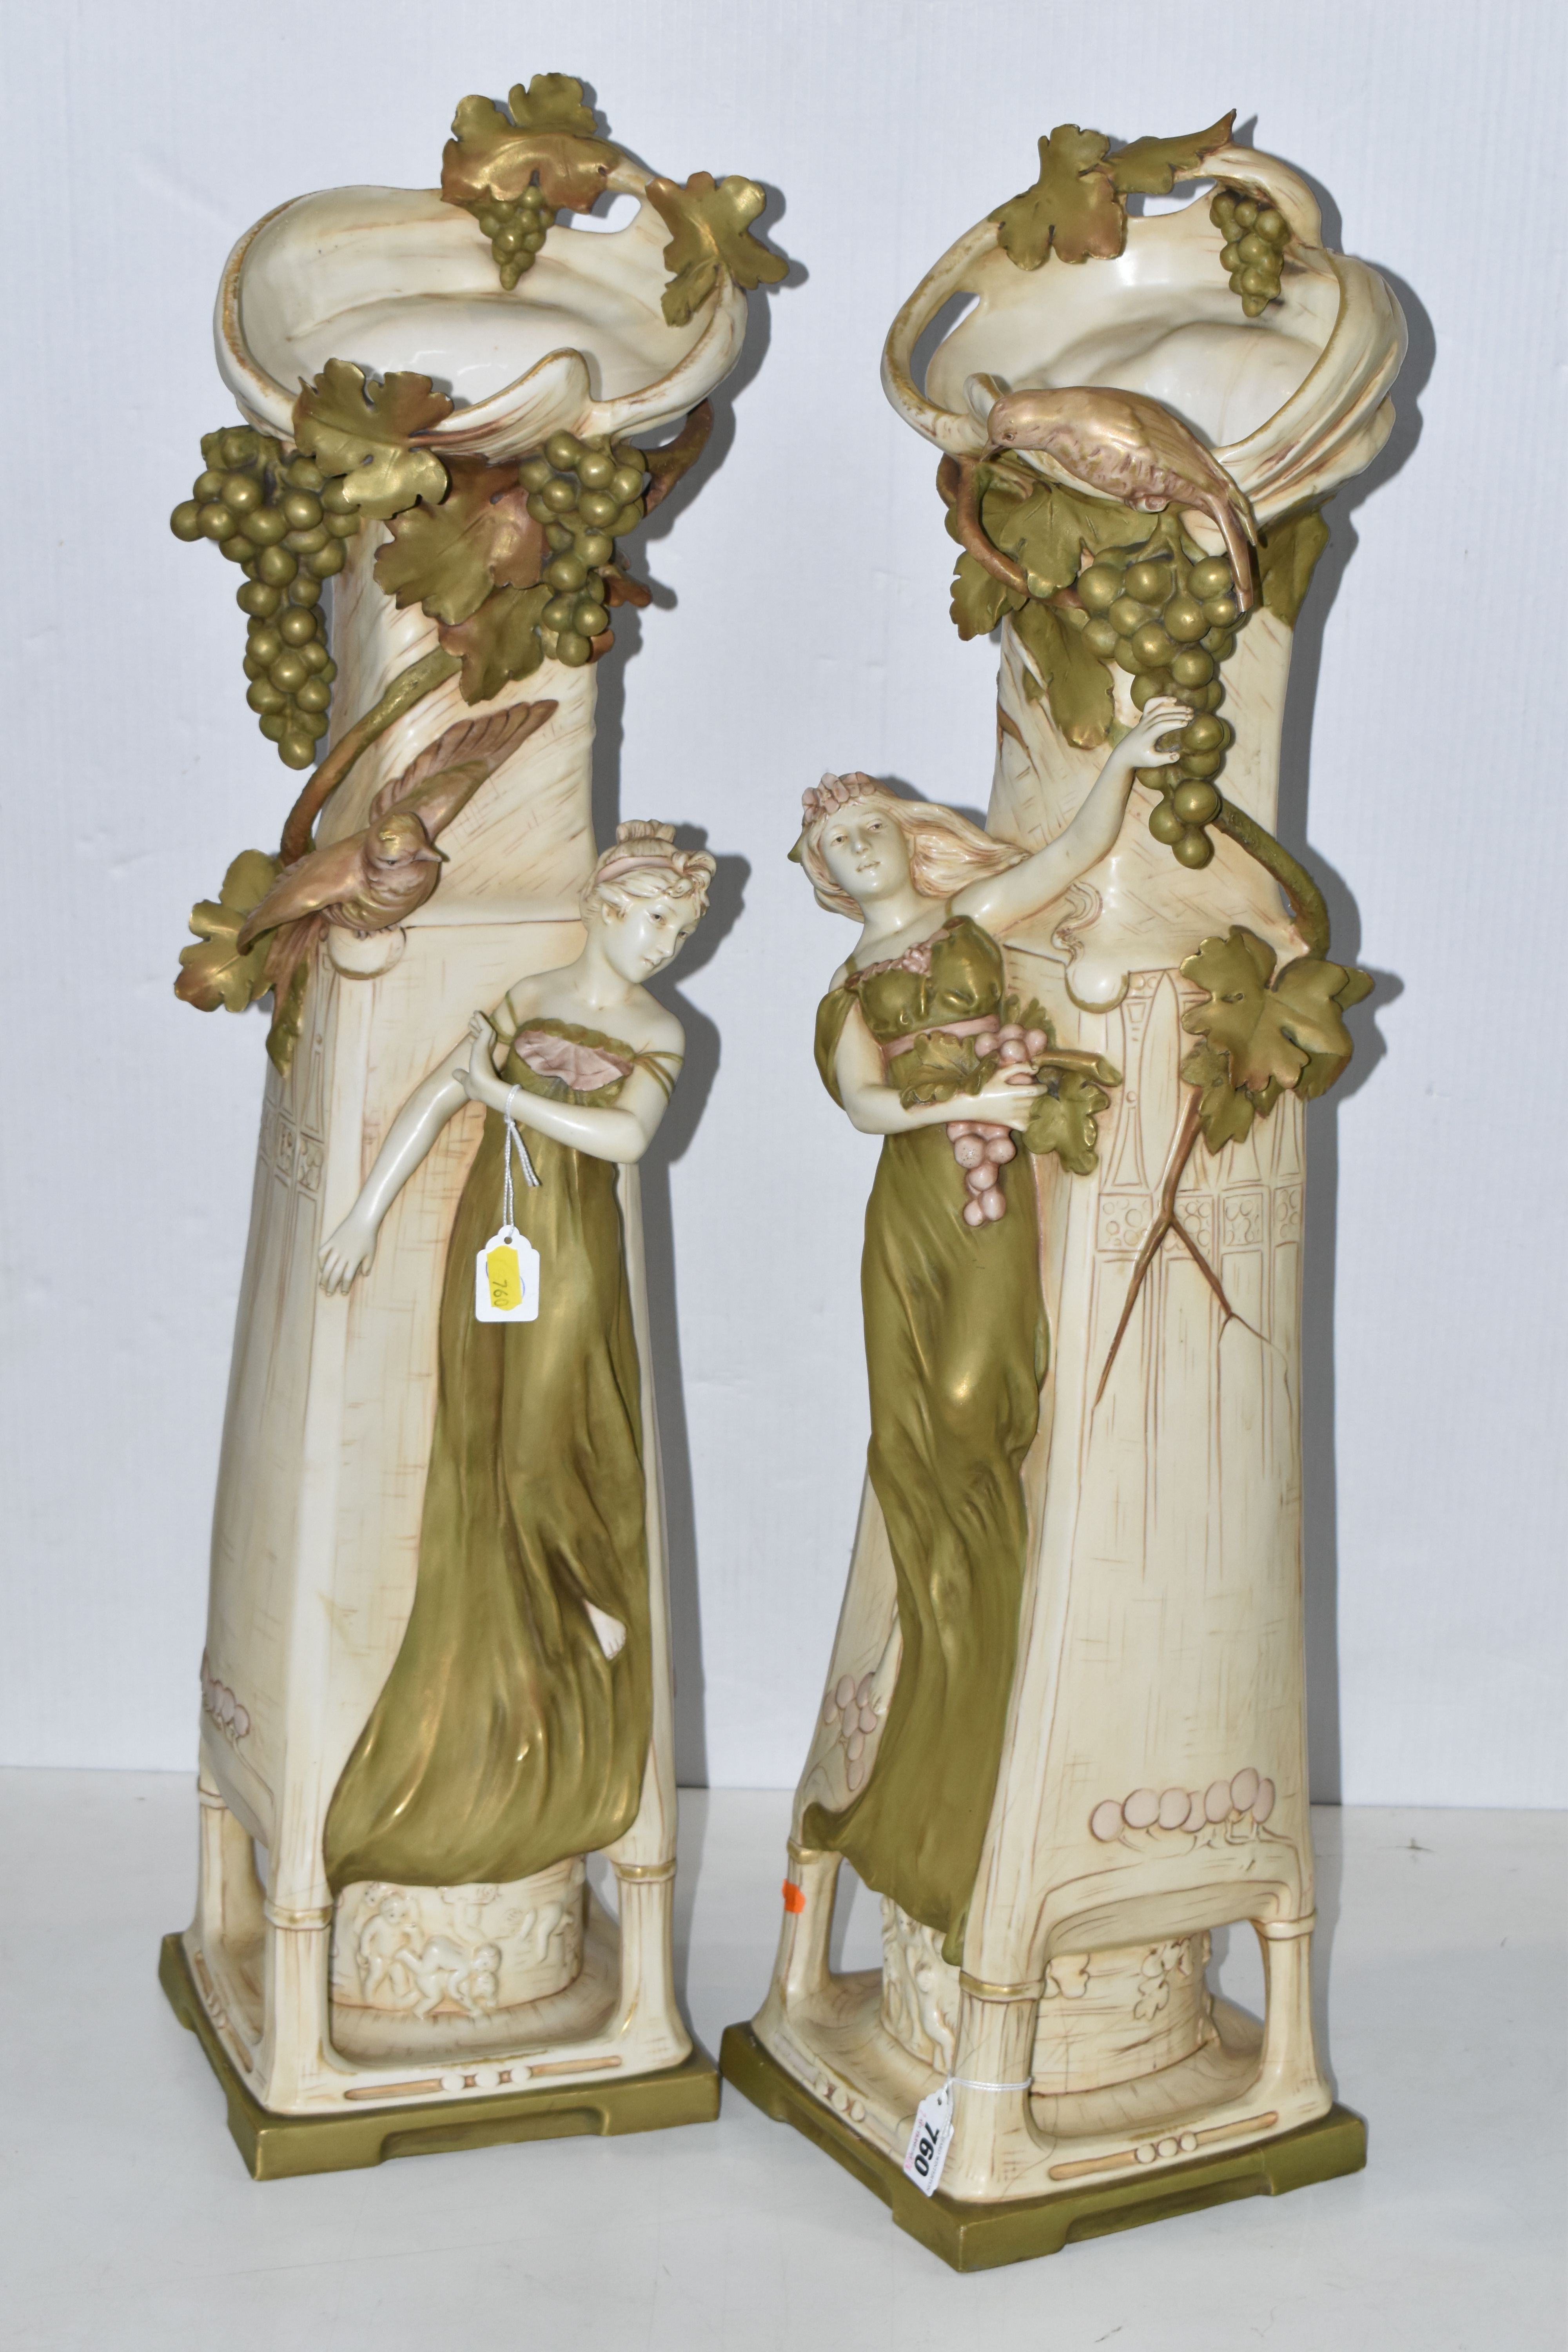 A PAIR OF ROYAL DUX ART NOUVEAU FIGURAL VASES, each modelled with a scrolling neck with fruiting